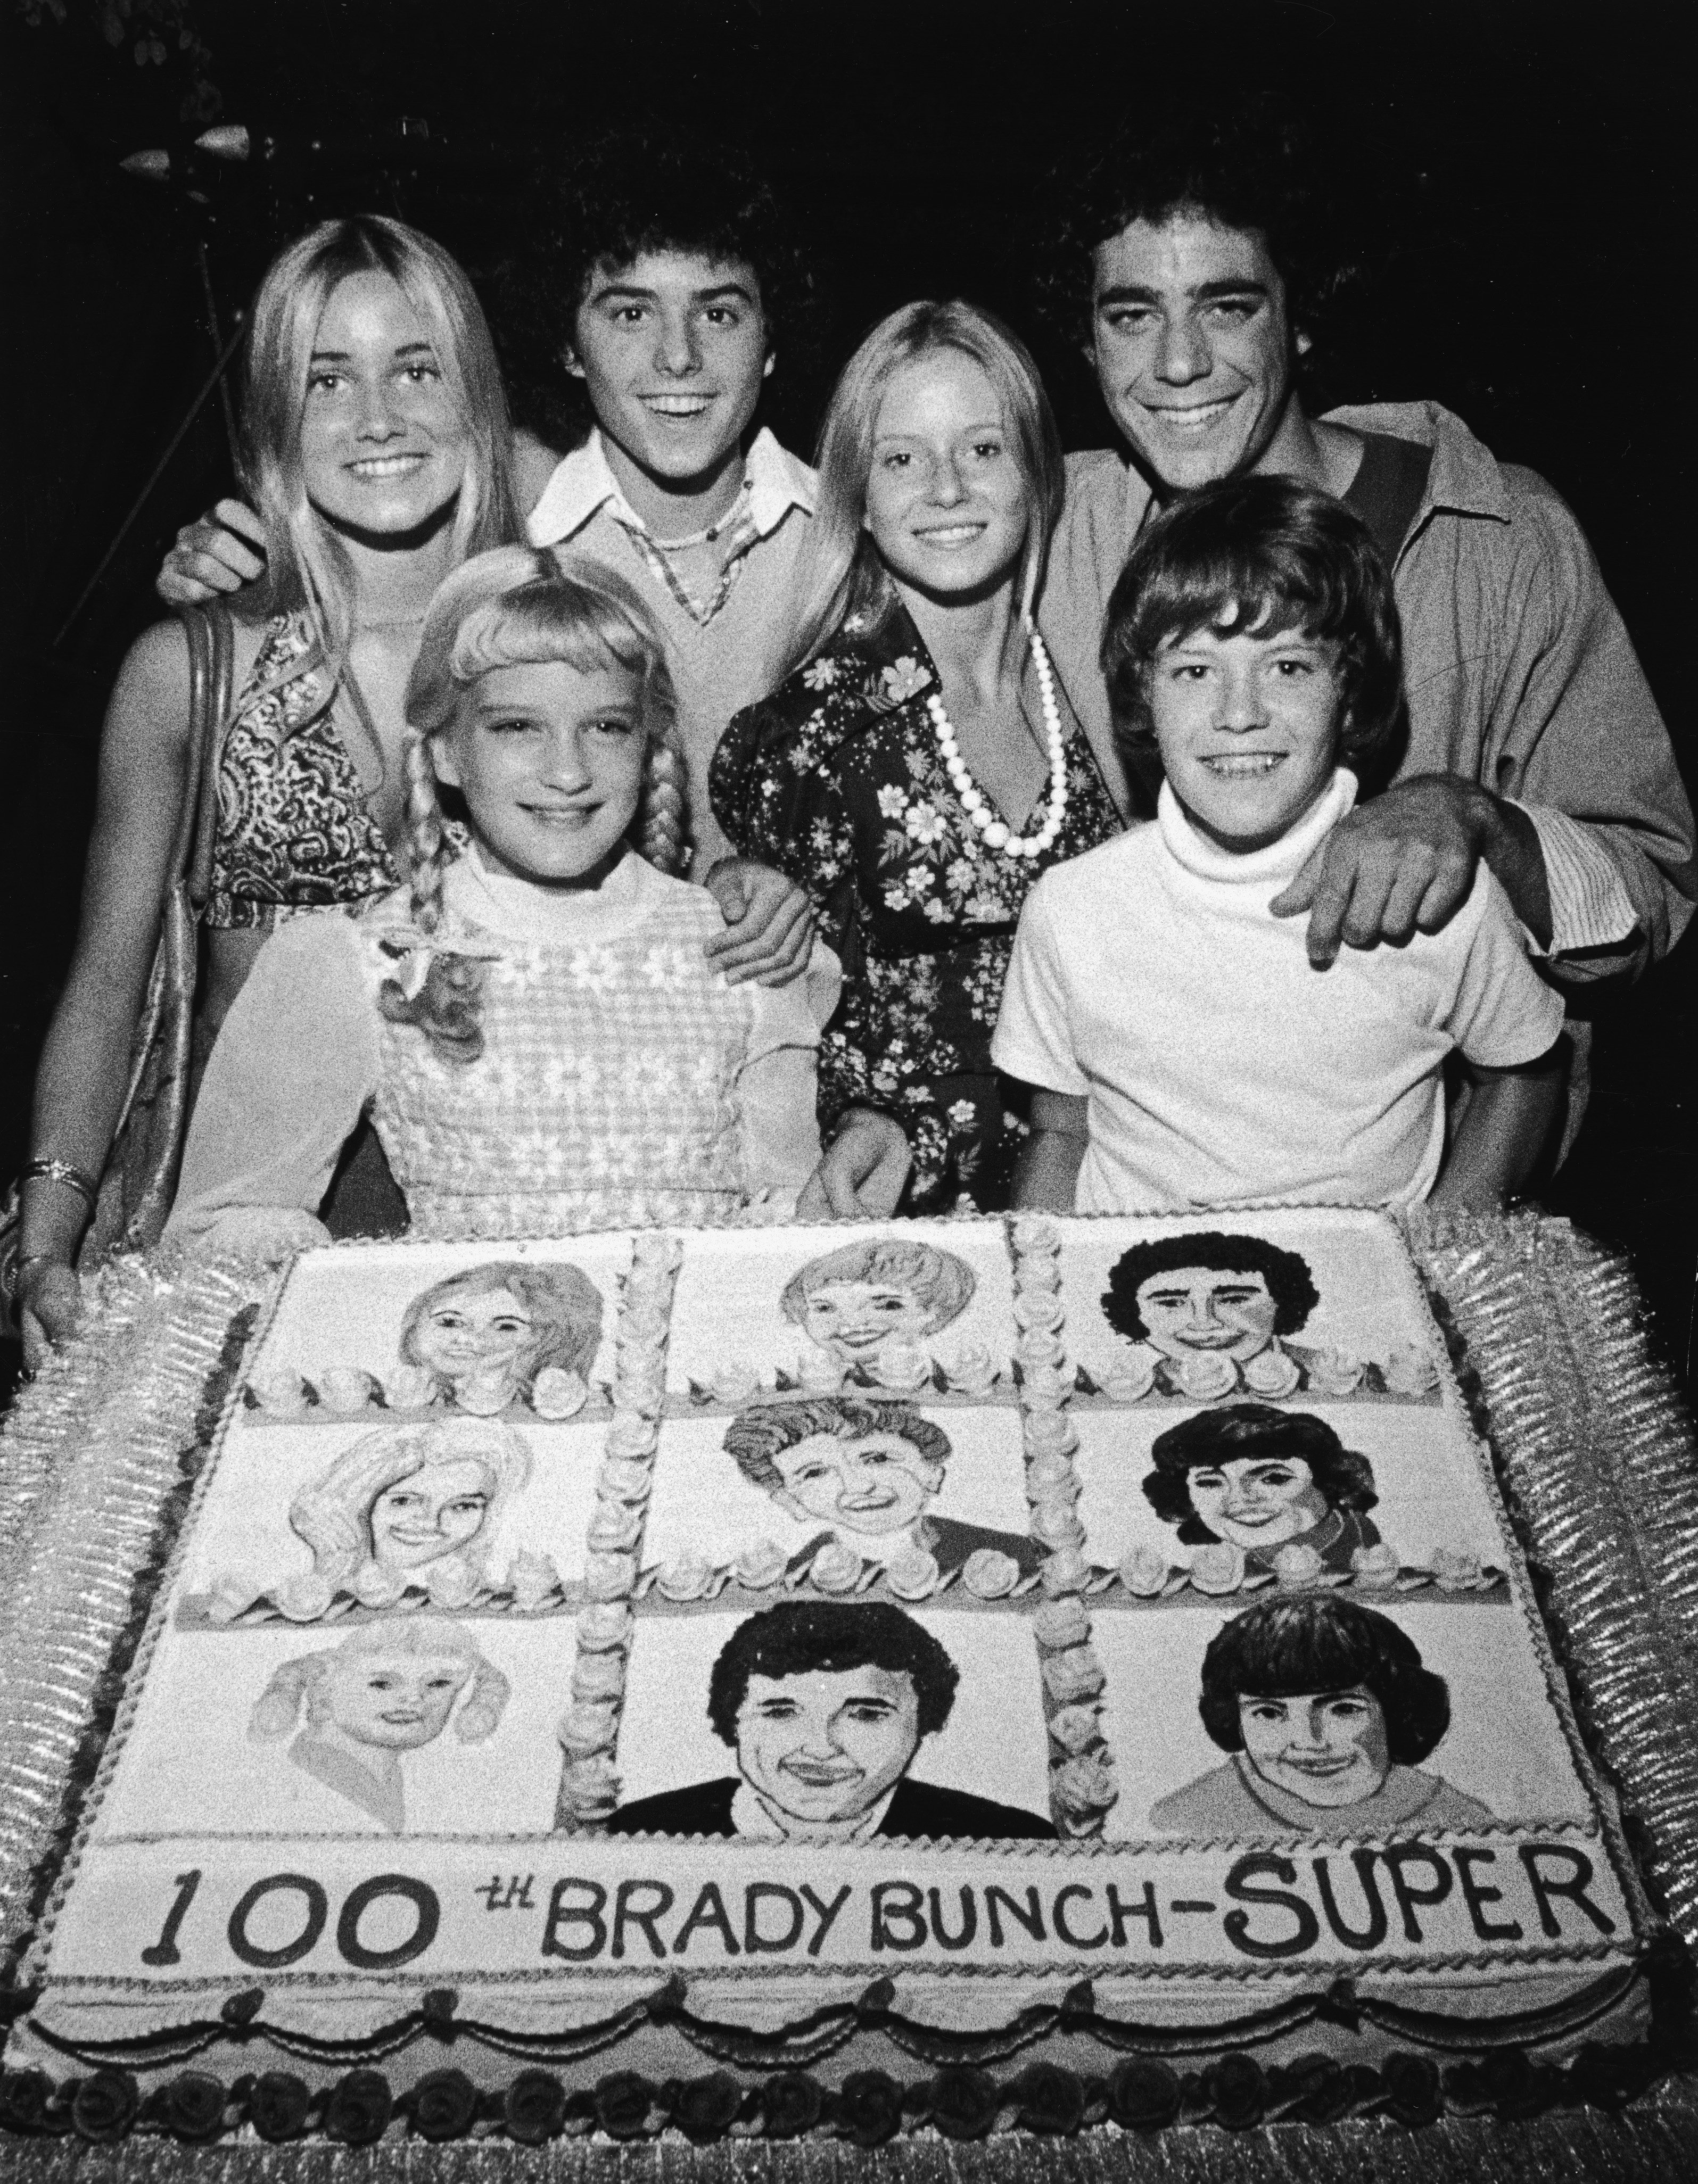 Young cast members of the television series, 'The Brady Bunch' pose with a cake celebrating the show's 100th episode, circa 1973. (L-R): Maureen McCormick, Susan Olsen, Christopher Knight, Eve Plumb, Barry Williams and Mike Lookinland. | Source: Getty Images